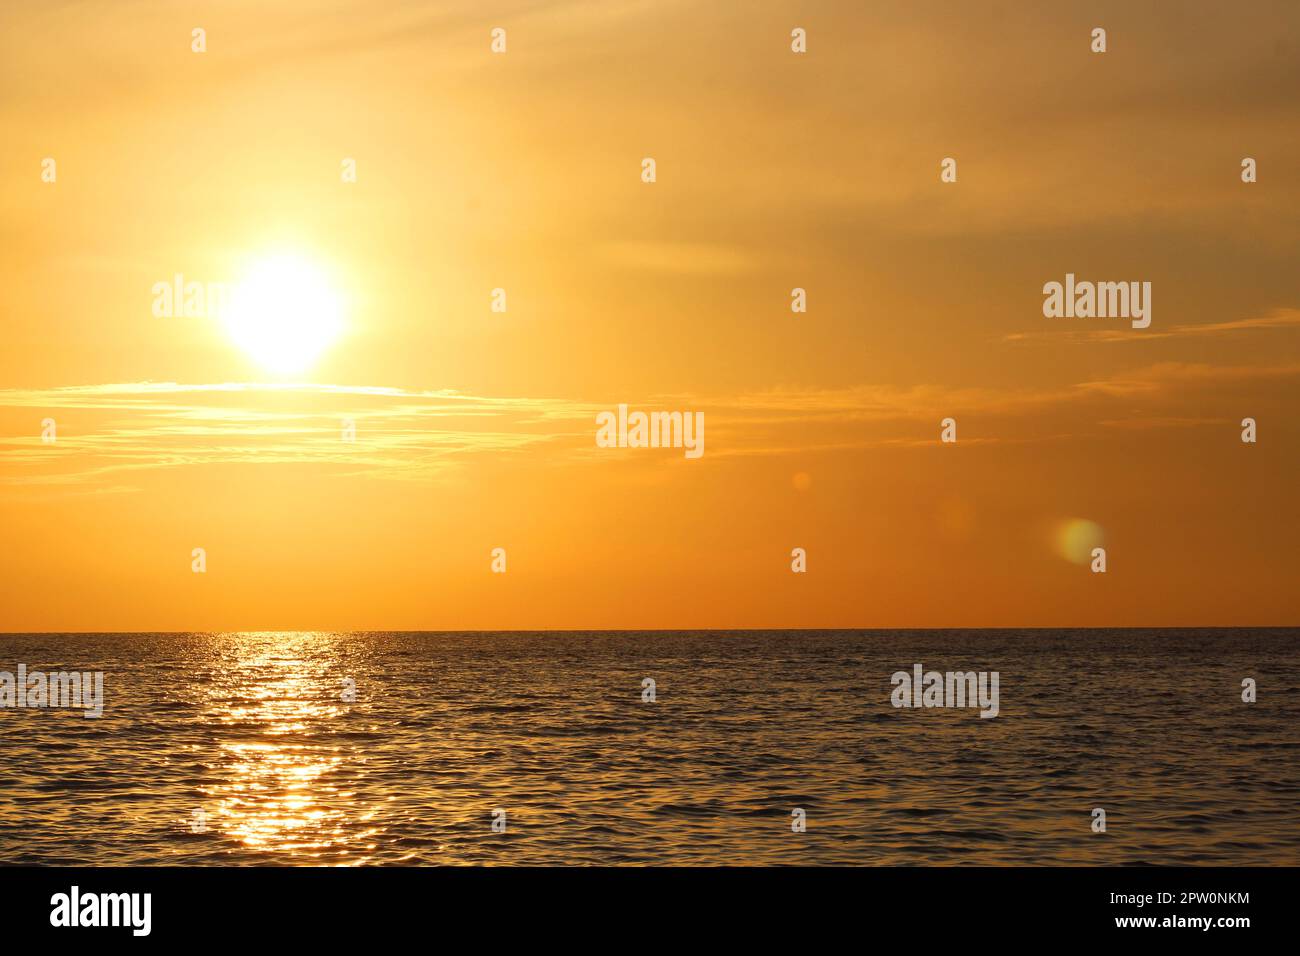 Beautiful sunset landscape at Mediterranean sea and orange sky above it with awesome sun golden reflection on calm waves. Stock Photo